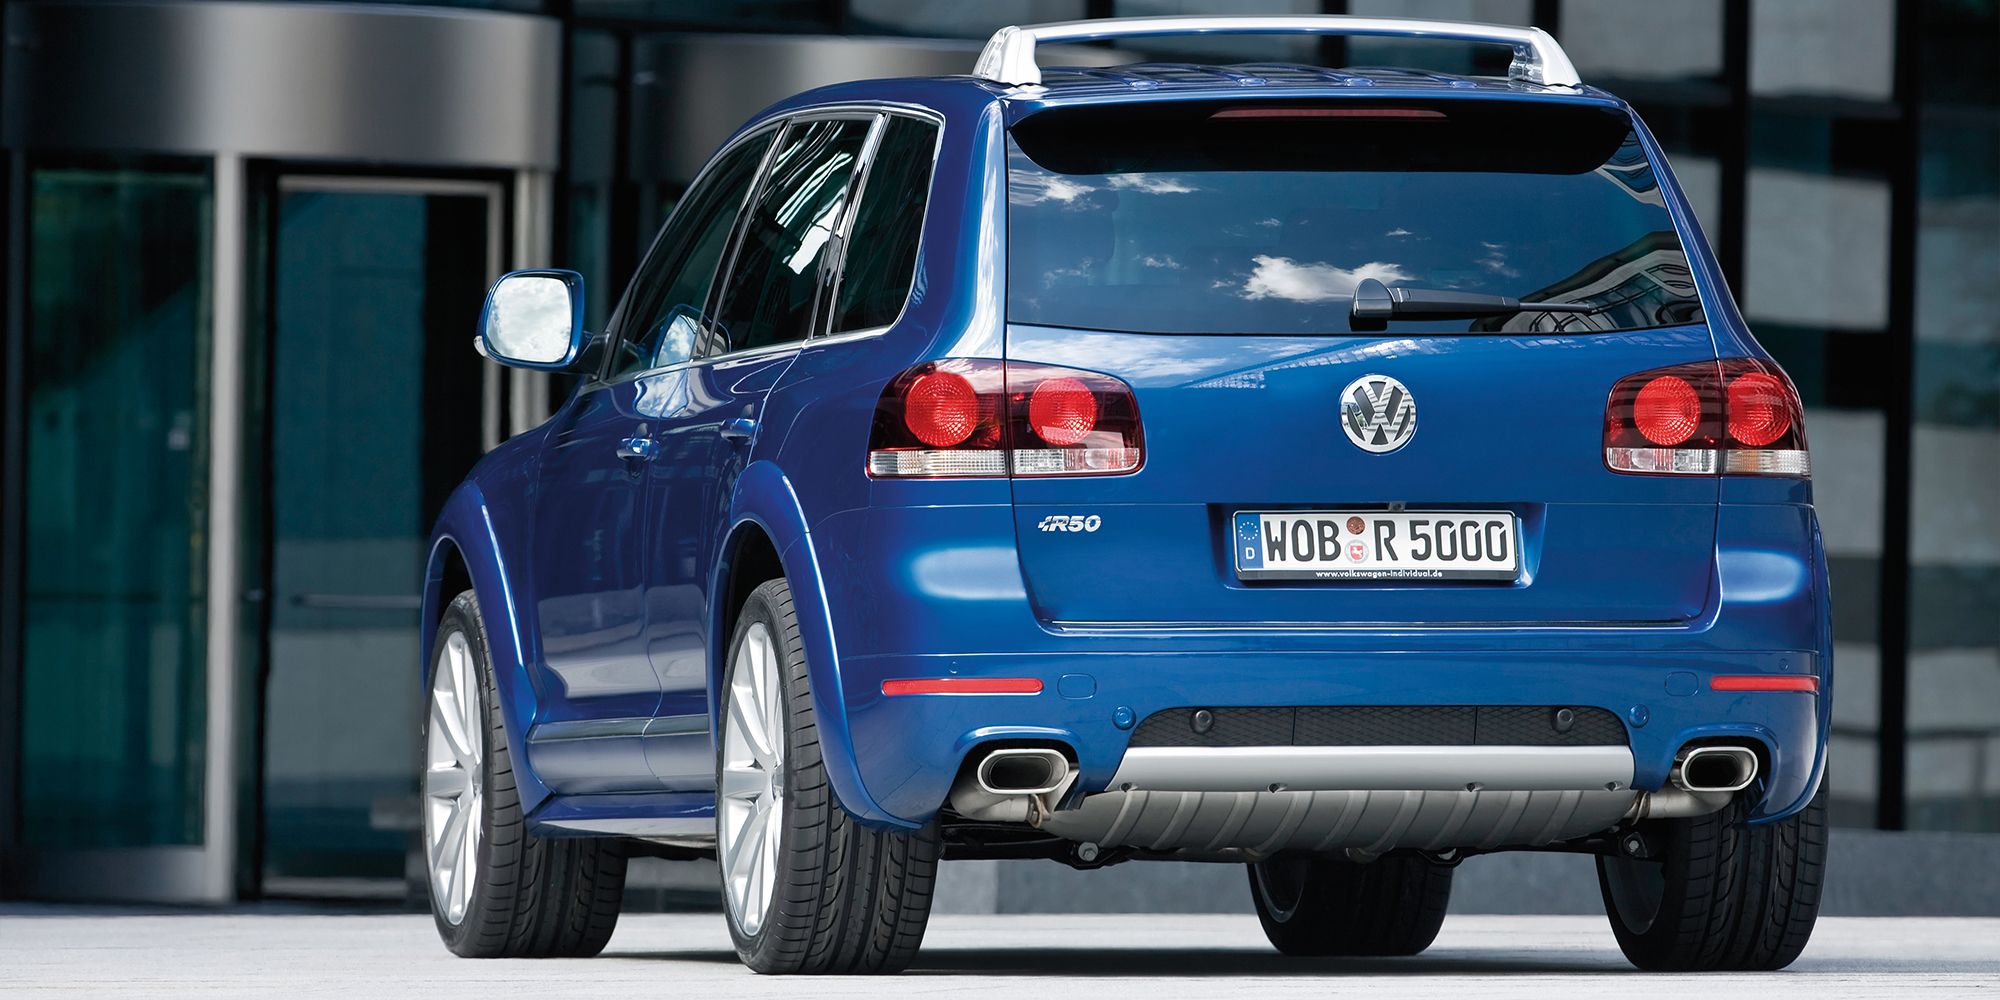 The rear of the Touareg R50